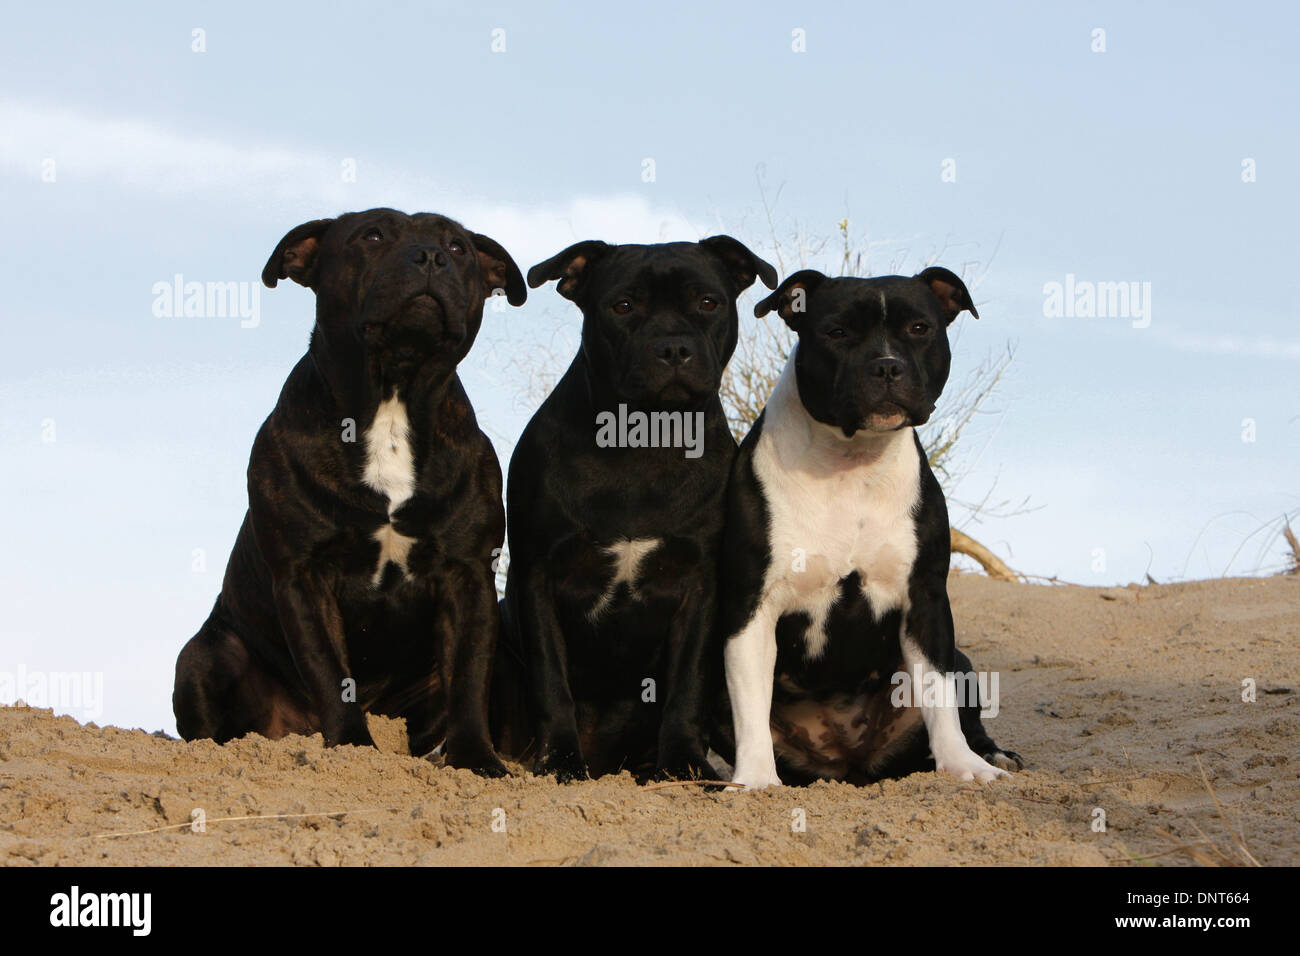 dog Staffordshire Bull Terrier / Staffie  three adults sitting on the sand Stock Photo